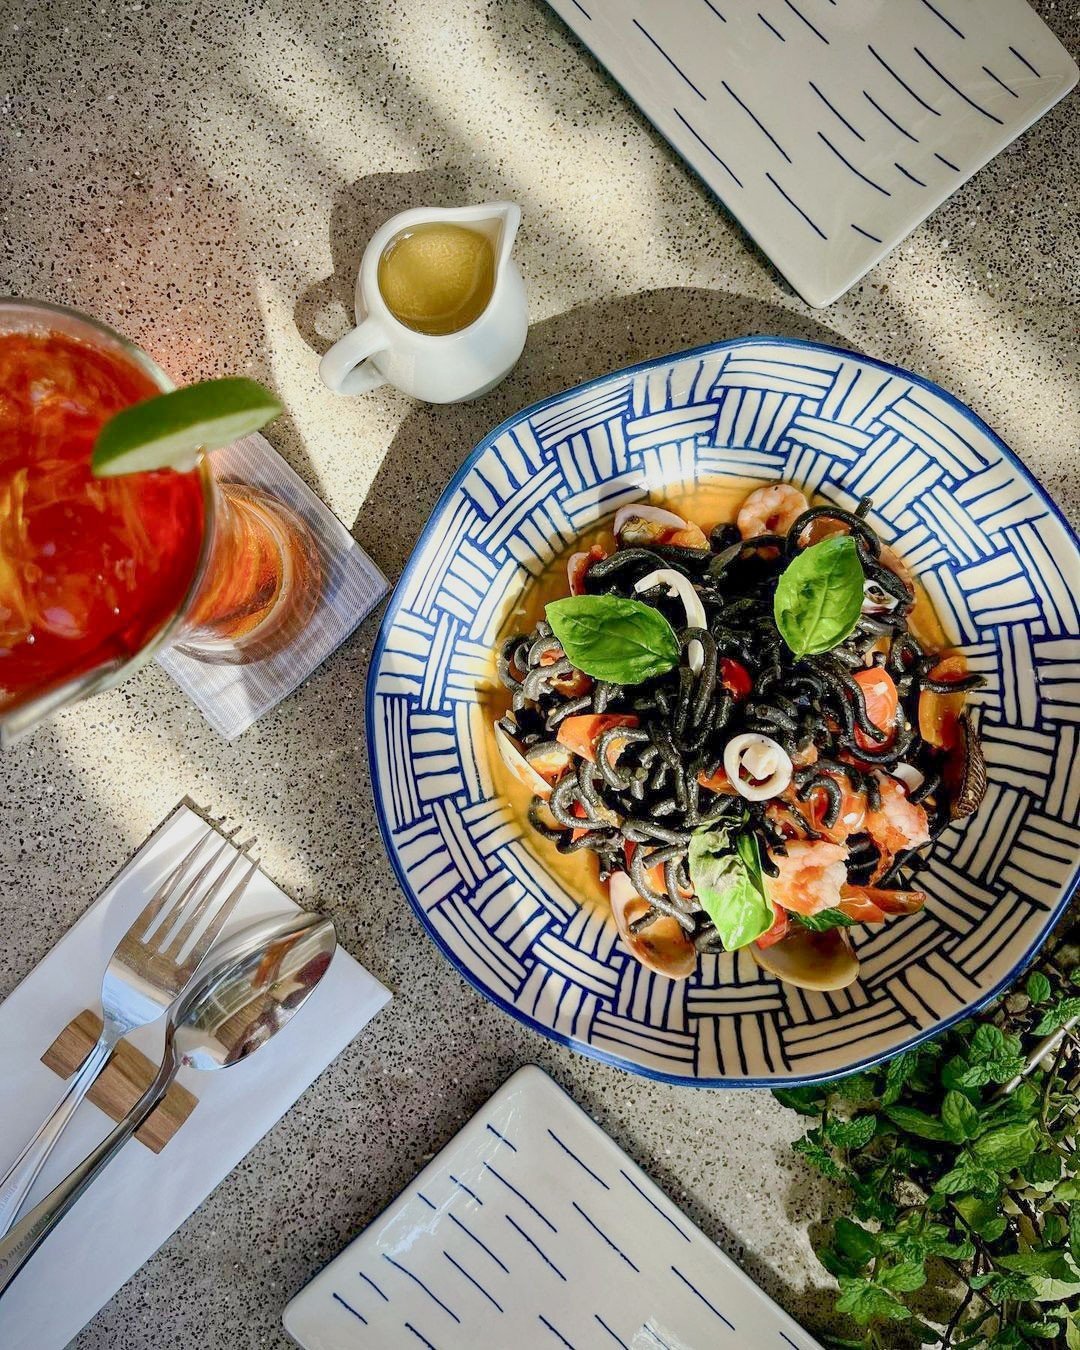 ⁠Heart eyes for this 😍⁠
⁠
Prepare to be seduced by our luxuriously dark Taglioni al Nero Frutti di Mare. Silky strands of homemade tagliolini pasta, dramatically dyed using squid ink, envelopes an ocean's bounty of tender baby squid, succulent shrim